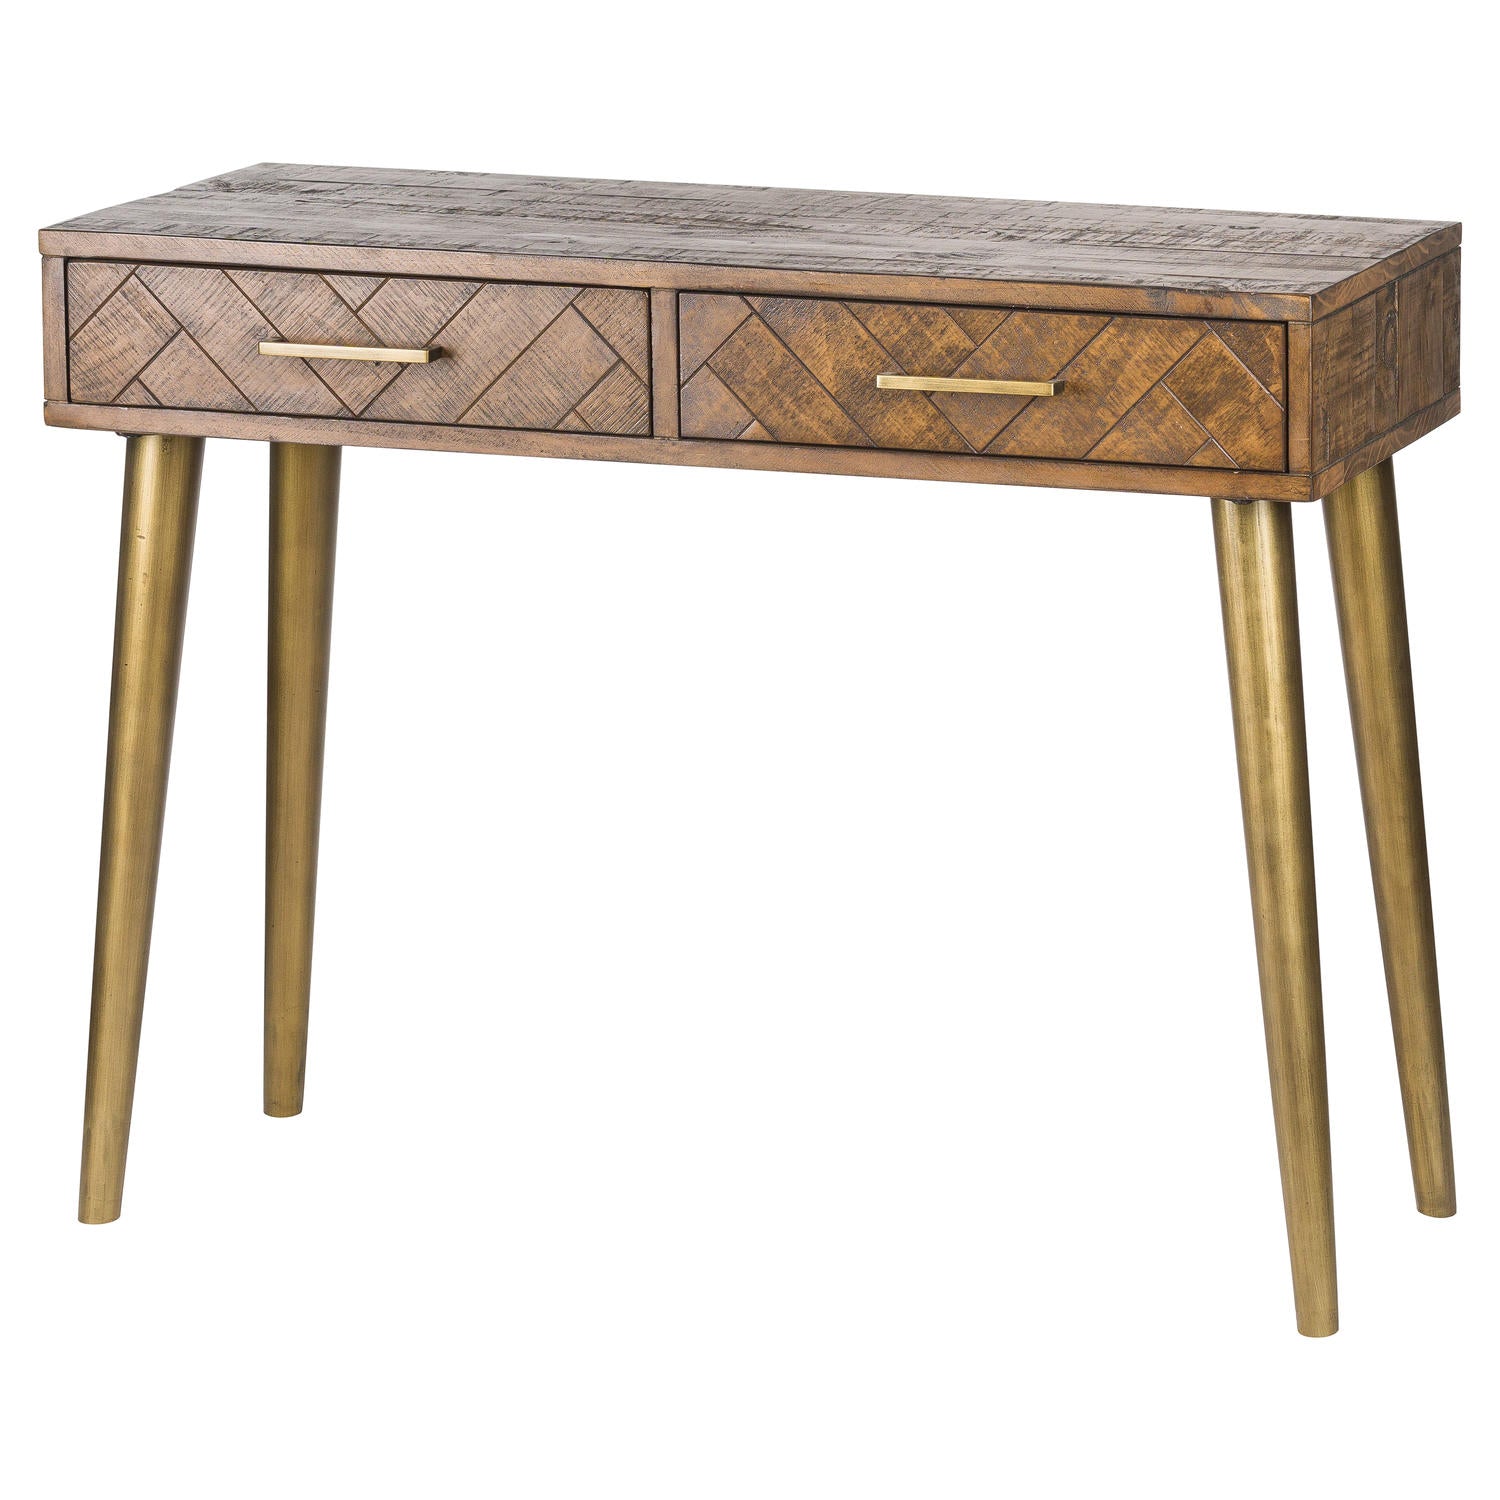 The Cuban Console Table